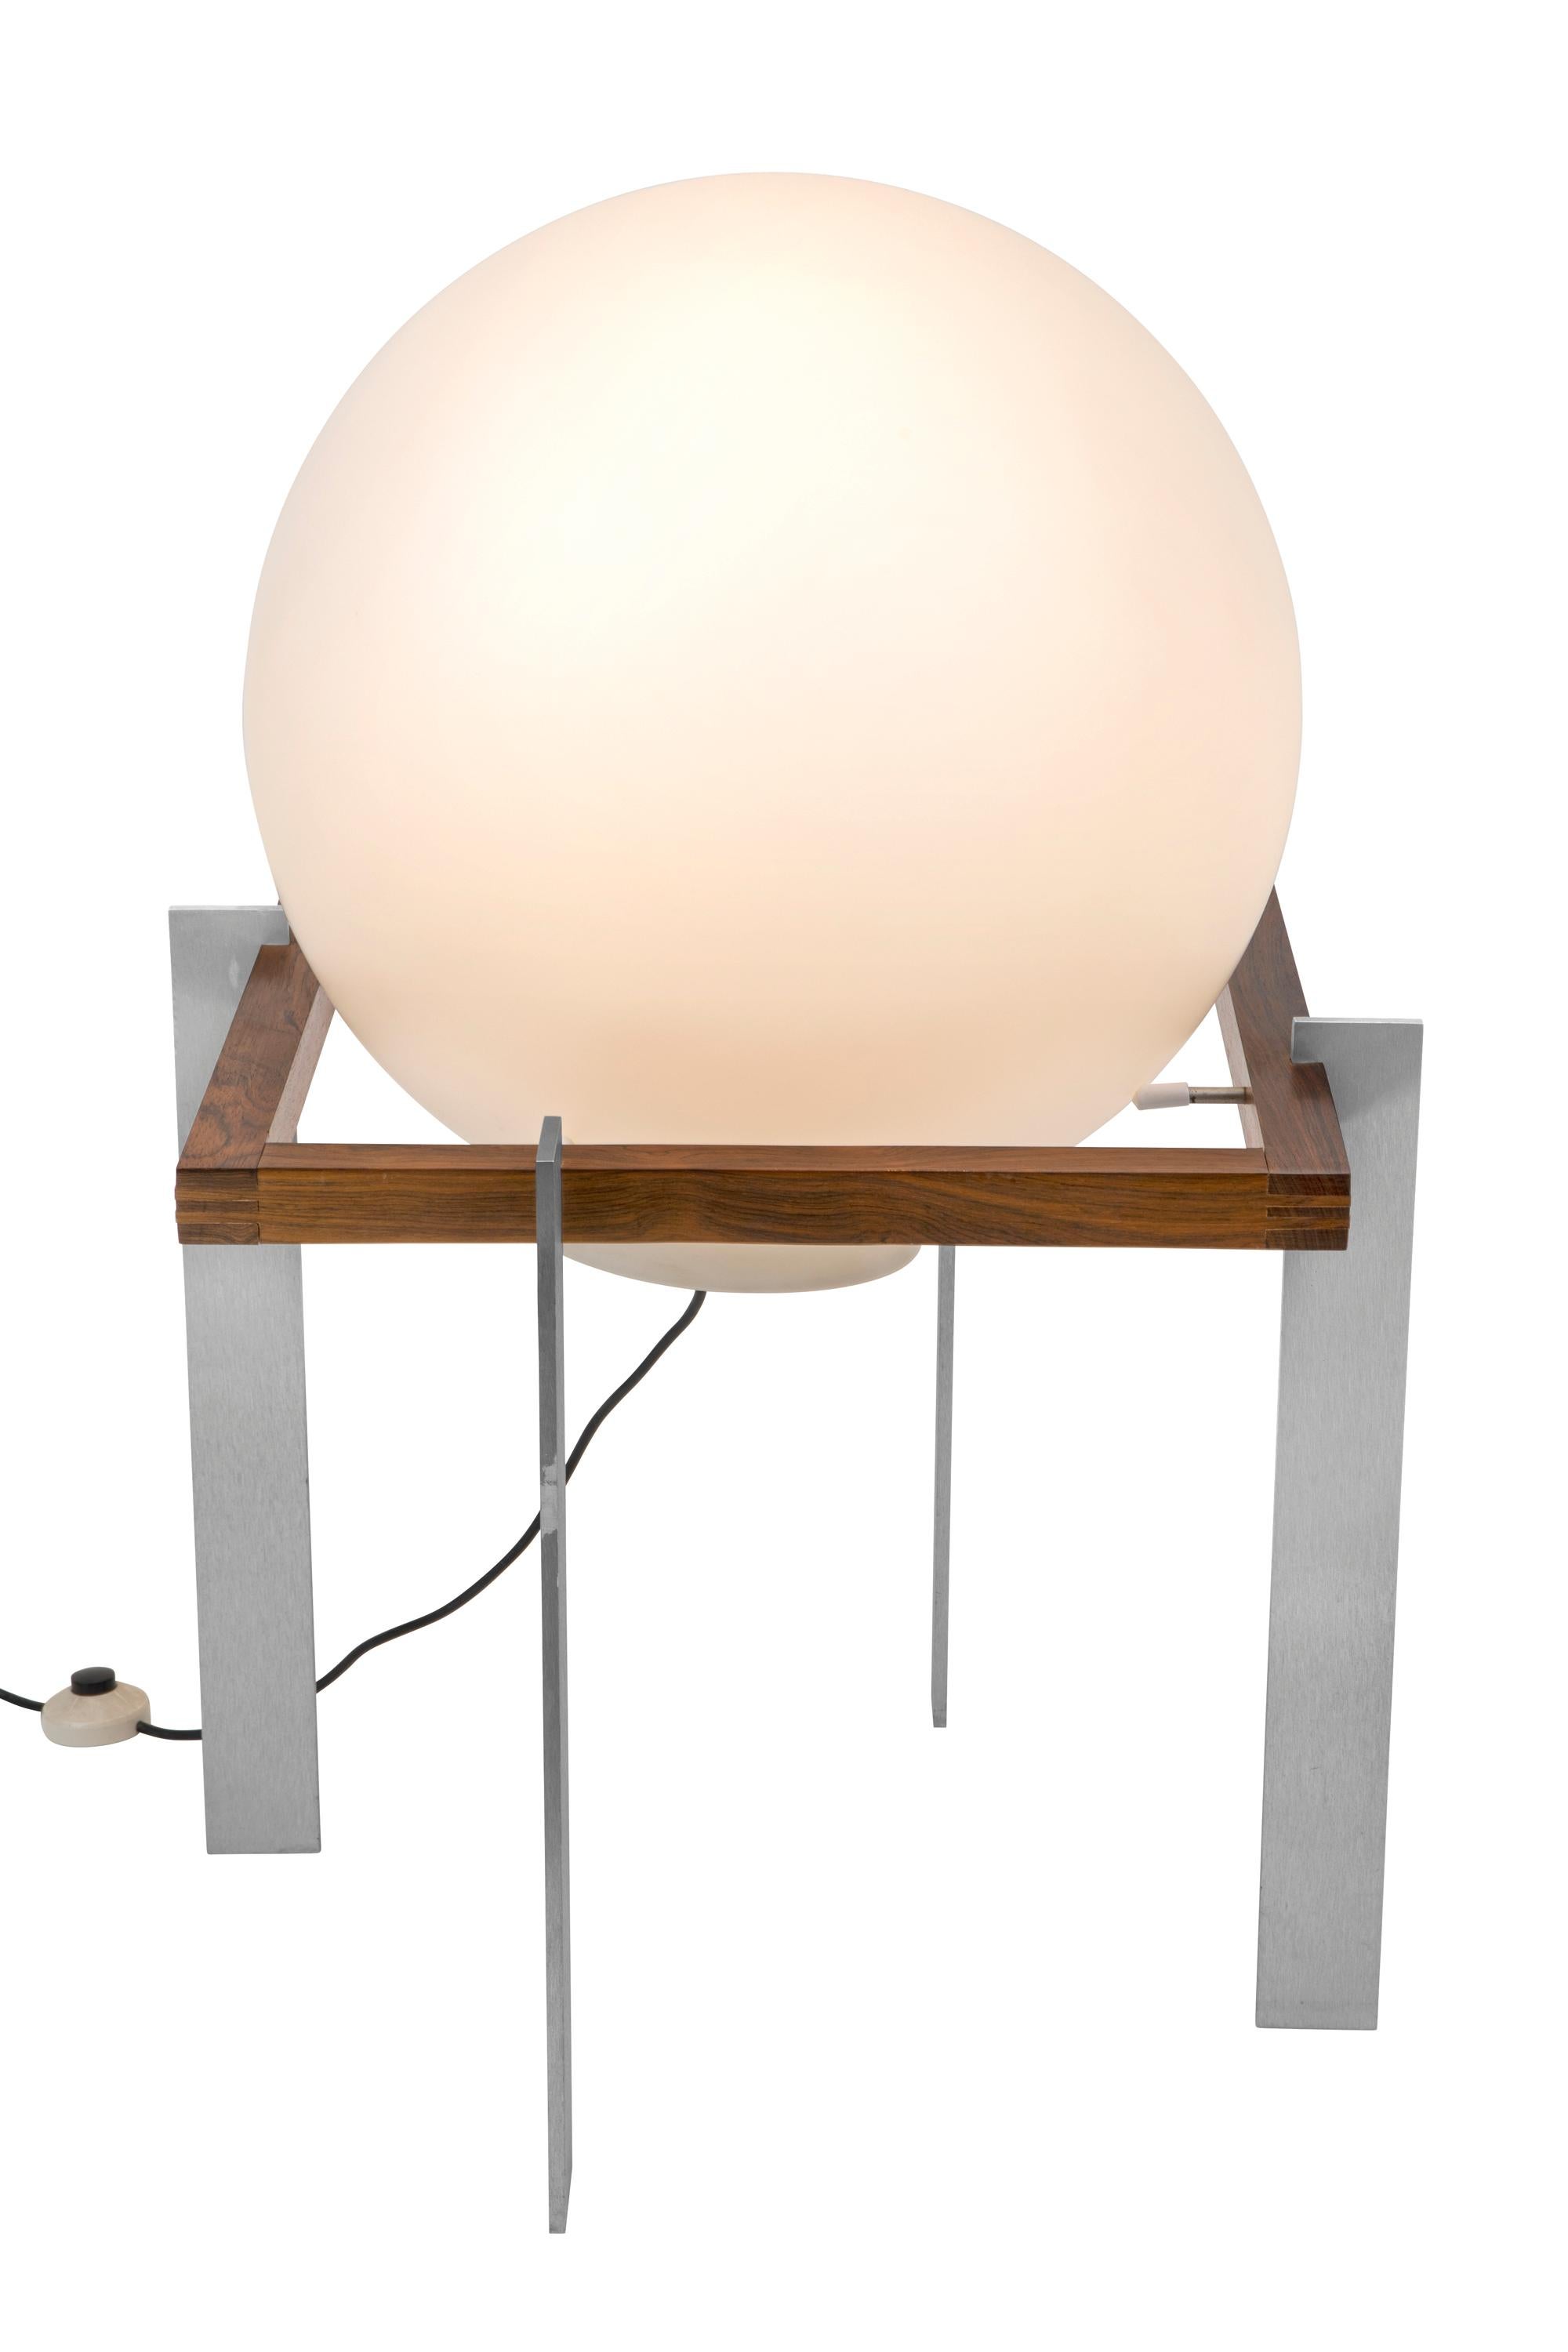 Founded in 1954 by Carel O. Lockhorn, Raak is recognized as one of the most important Dutch lighting manufacturers of the 20th century. The lamp has a solid rosewood square frame with solid aluminum legs and a large matte white glass ball. The